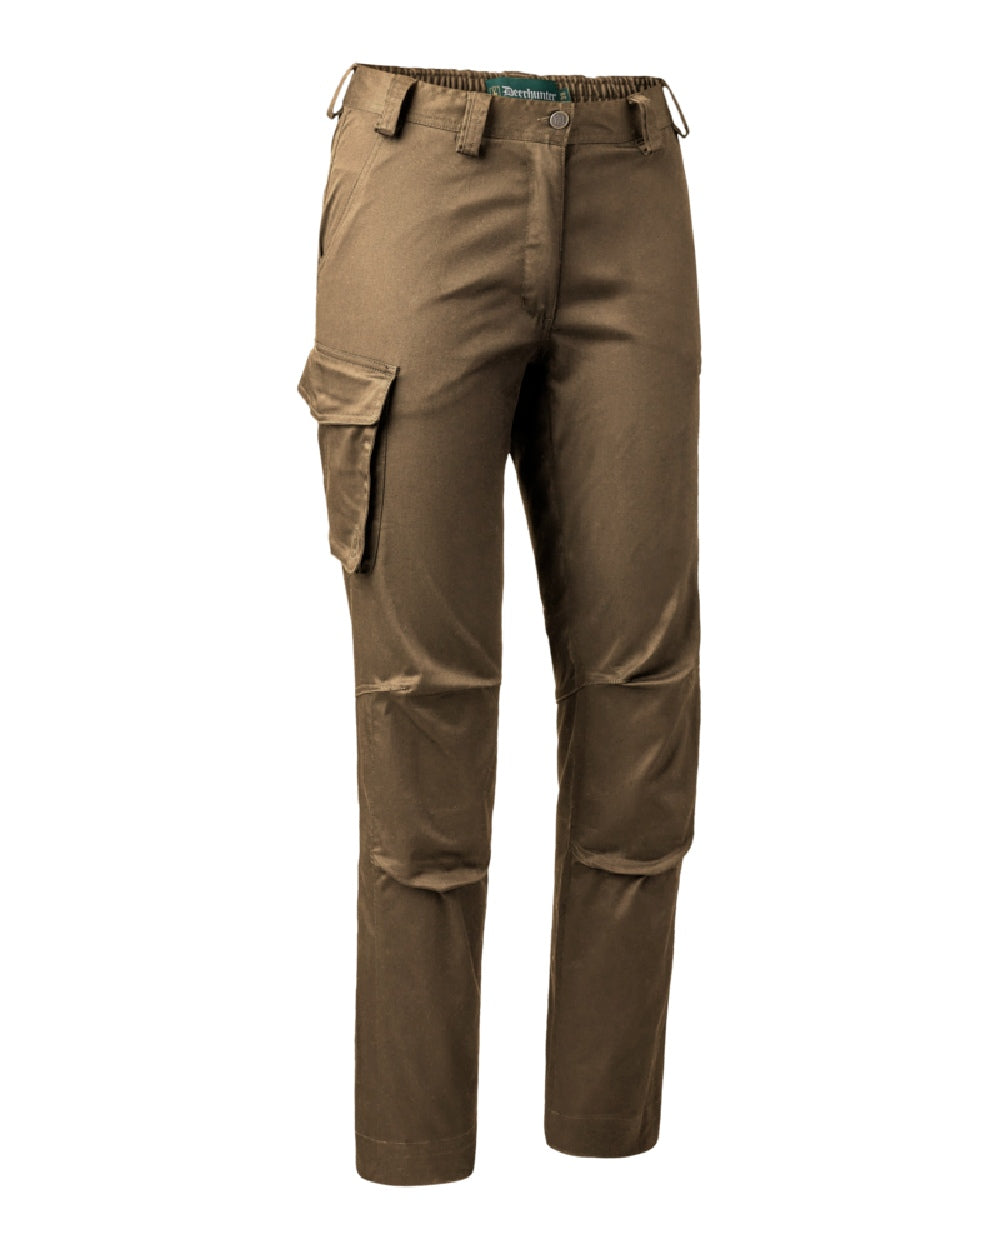 Deerhunter Lady Traveler Trousers in Hickory 